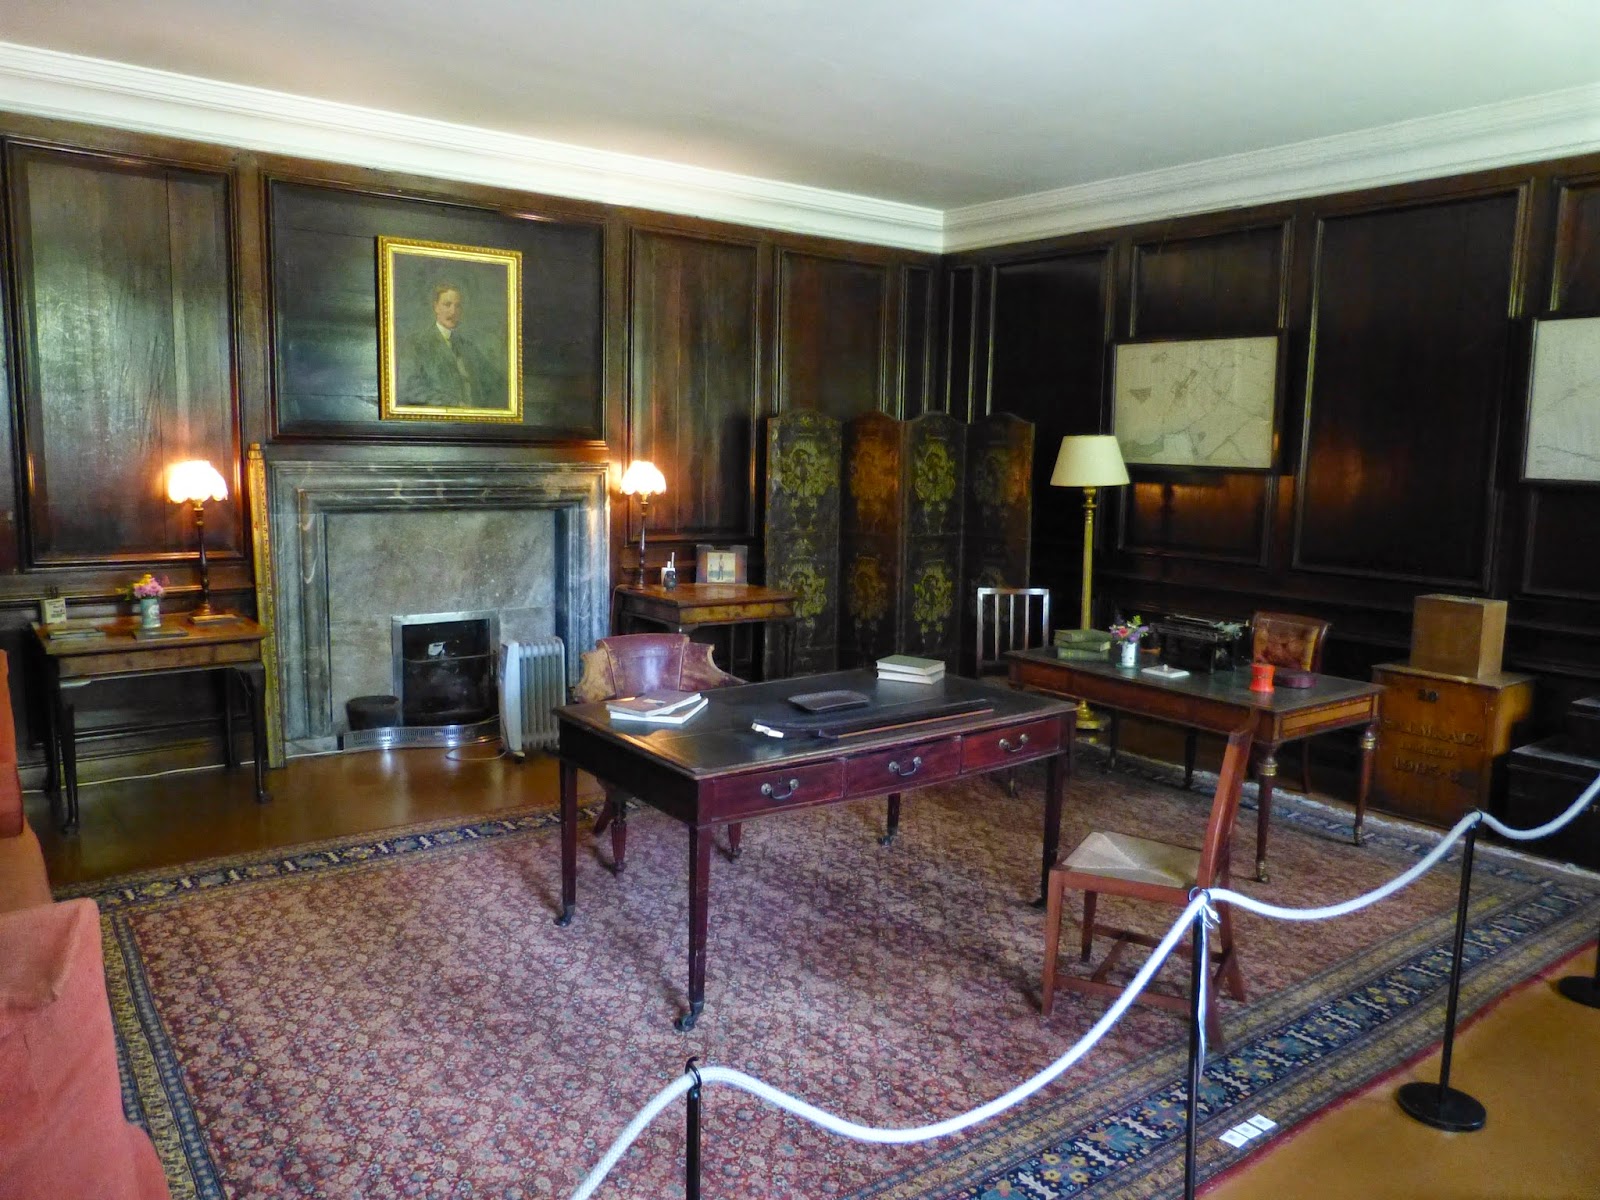 The Steward's Room  Displayed as left by the Earl of Jersey in the 1970s